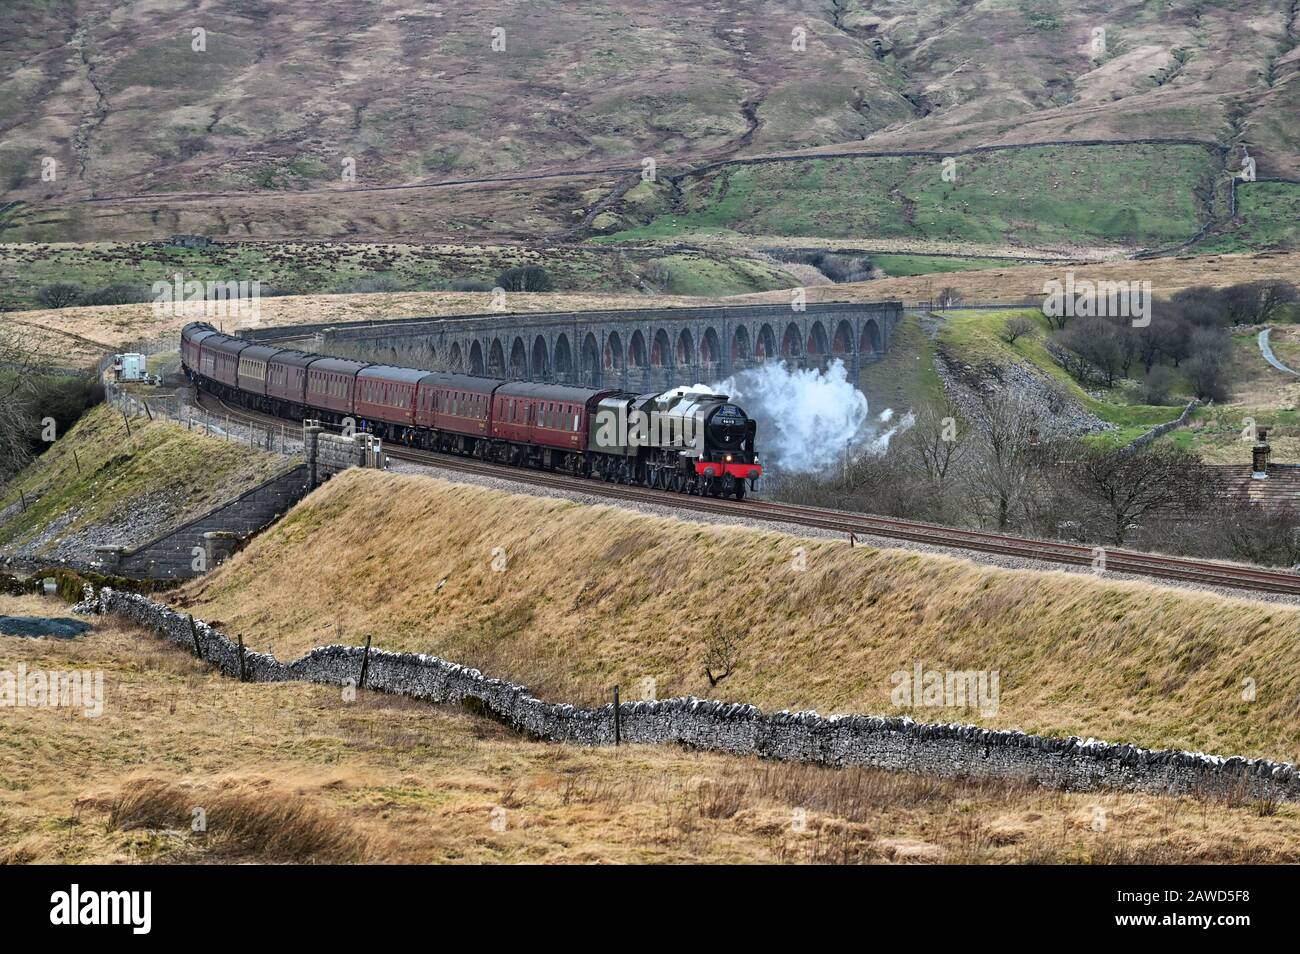 Ribblehead, North Yorkshire, UK. 8th January, 2020.The 'Winter Cumbrian Mountain Express' steam special hauled by 46115 'Scots Guardsman' is seen here crossing the famous Ribblehead viaduct in the Yorkshire Dales National Park, travelling south from Carlisle on the famous Settle to Carlisle railway line. Credit: John Bentley/Alamy Live News Stock Photo